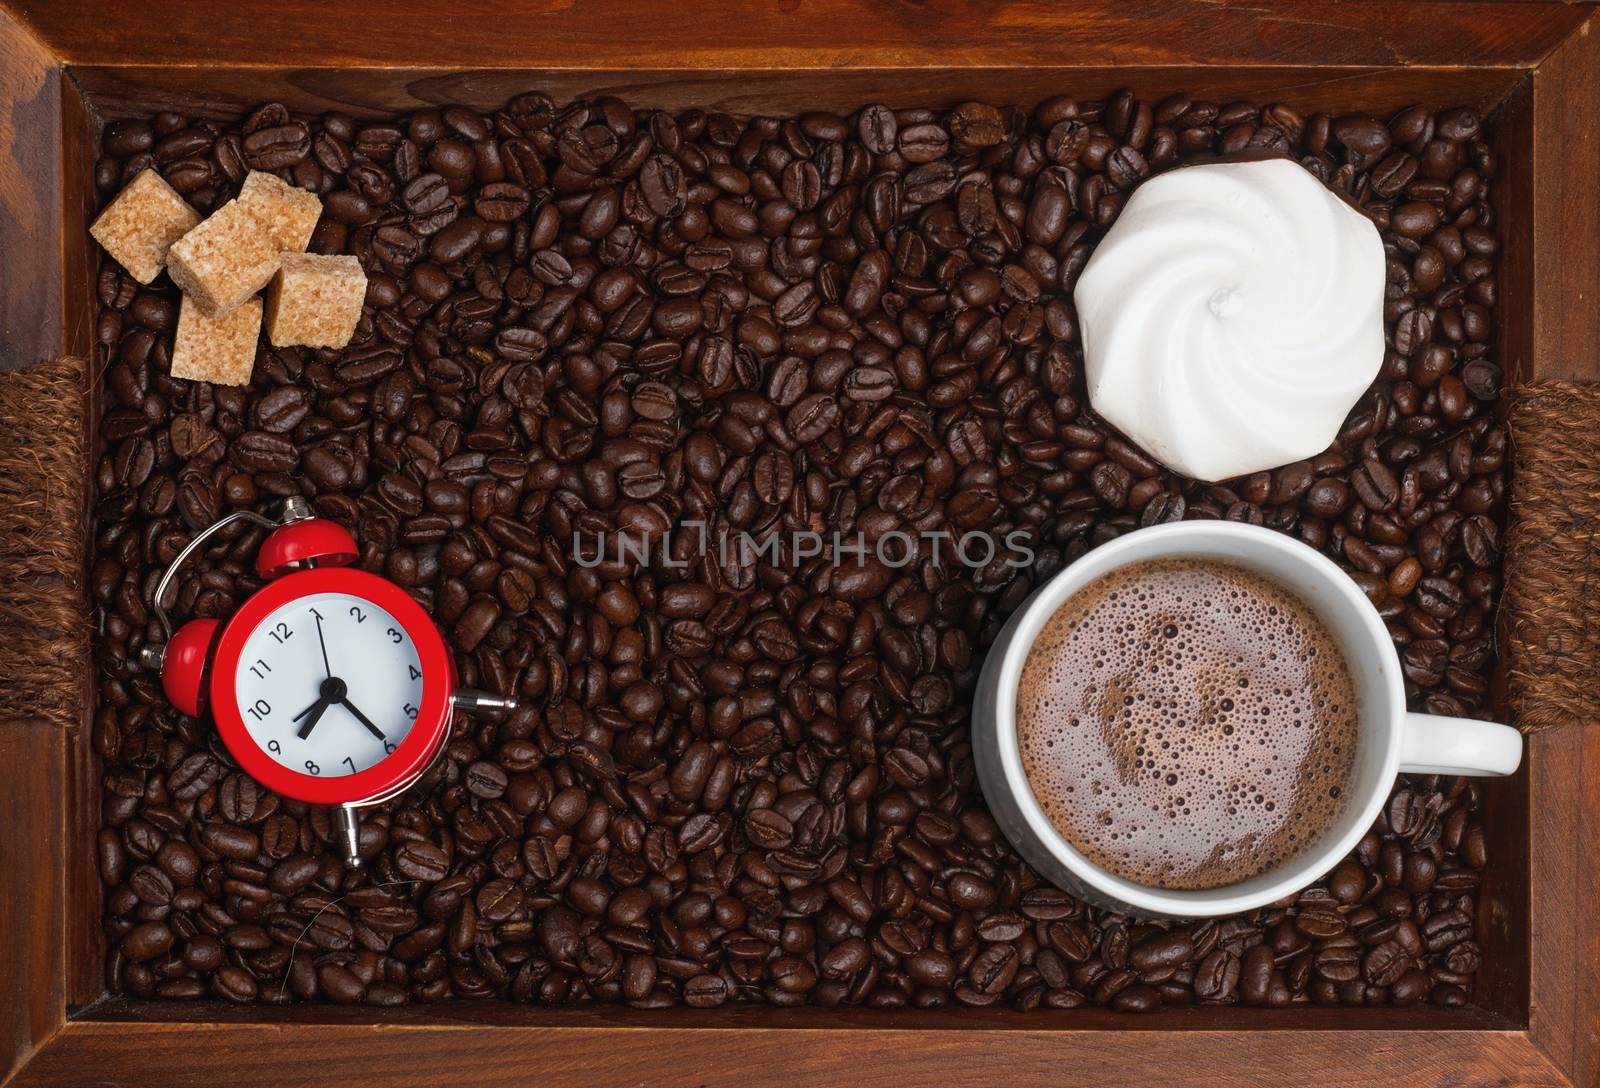 Cup of coffee, biscuit, sugar, watch, coffee beans on a wooden tray. View from the top.